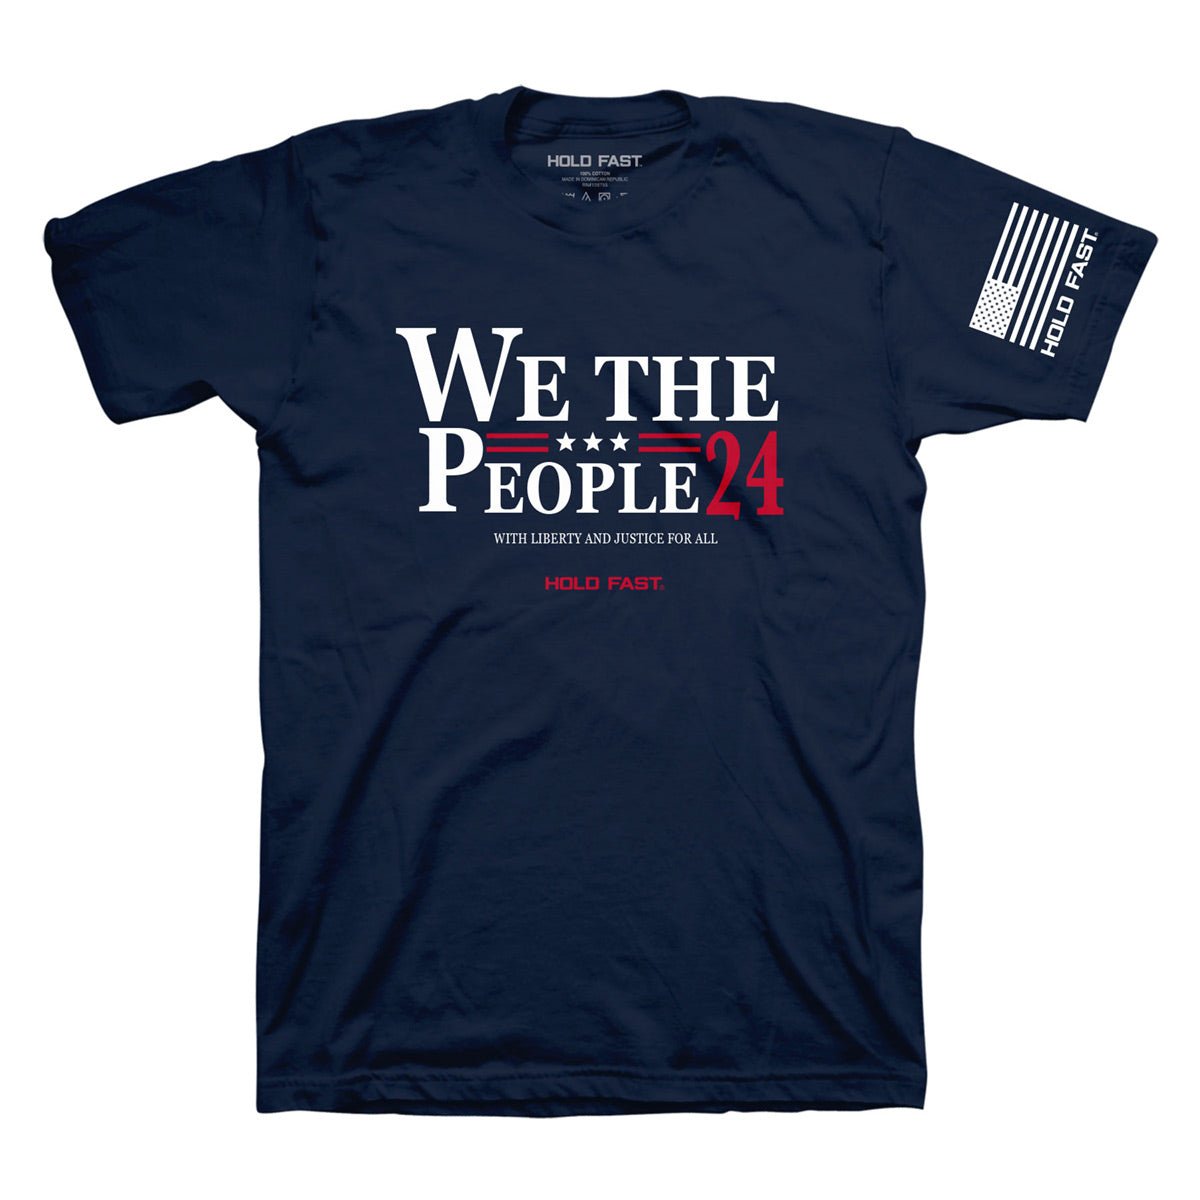 We The People 24™ | HOLD FAST® Adult T-Shirt - Zealous Christian Gear - 2